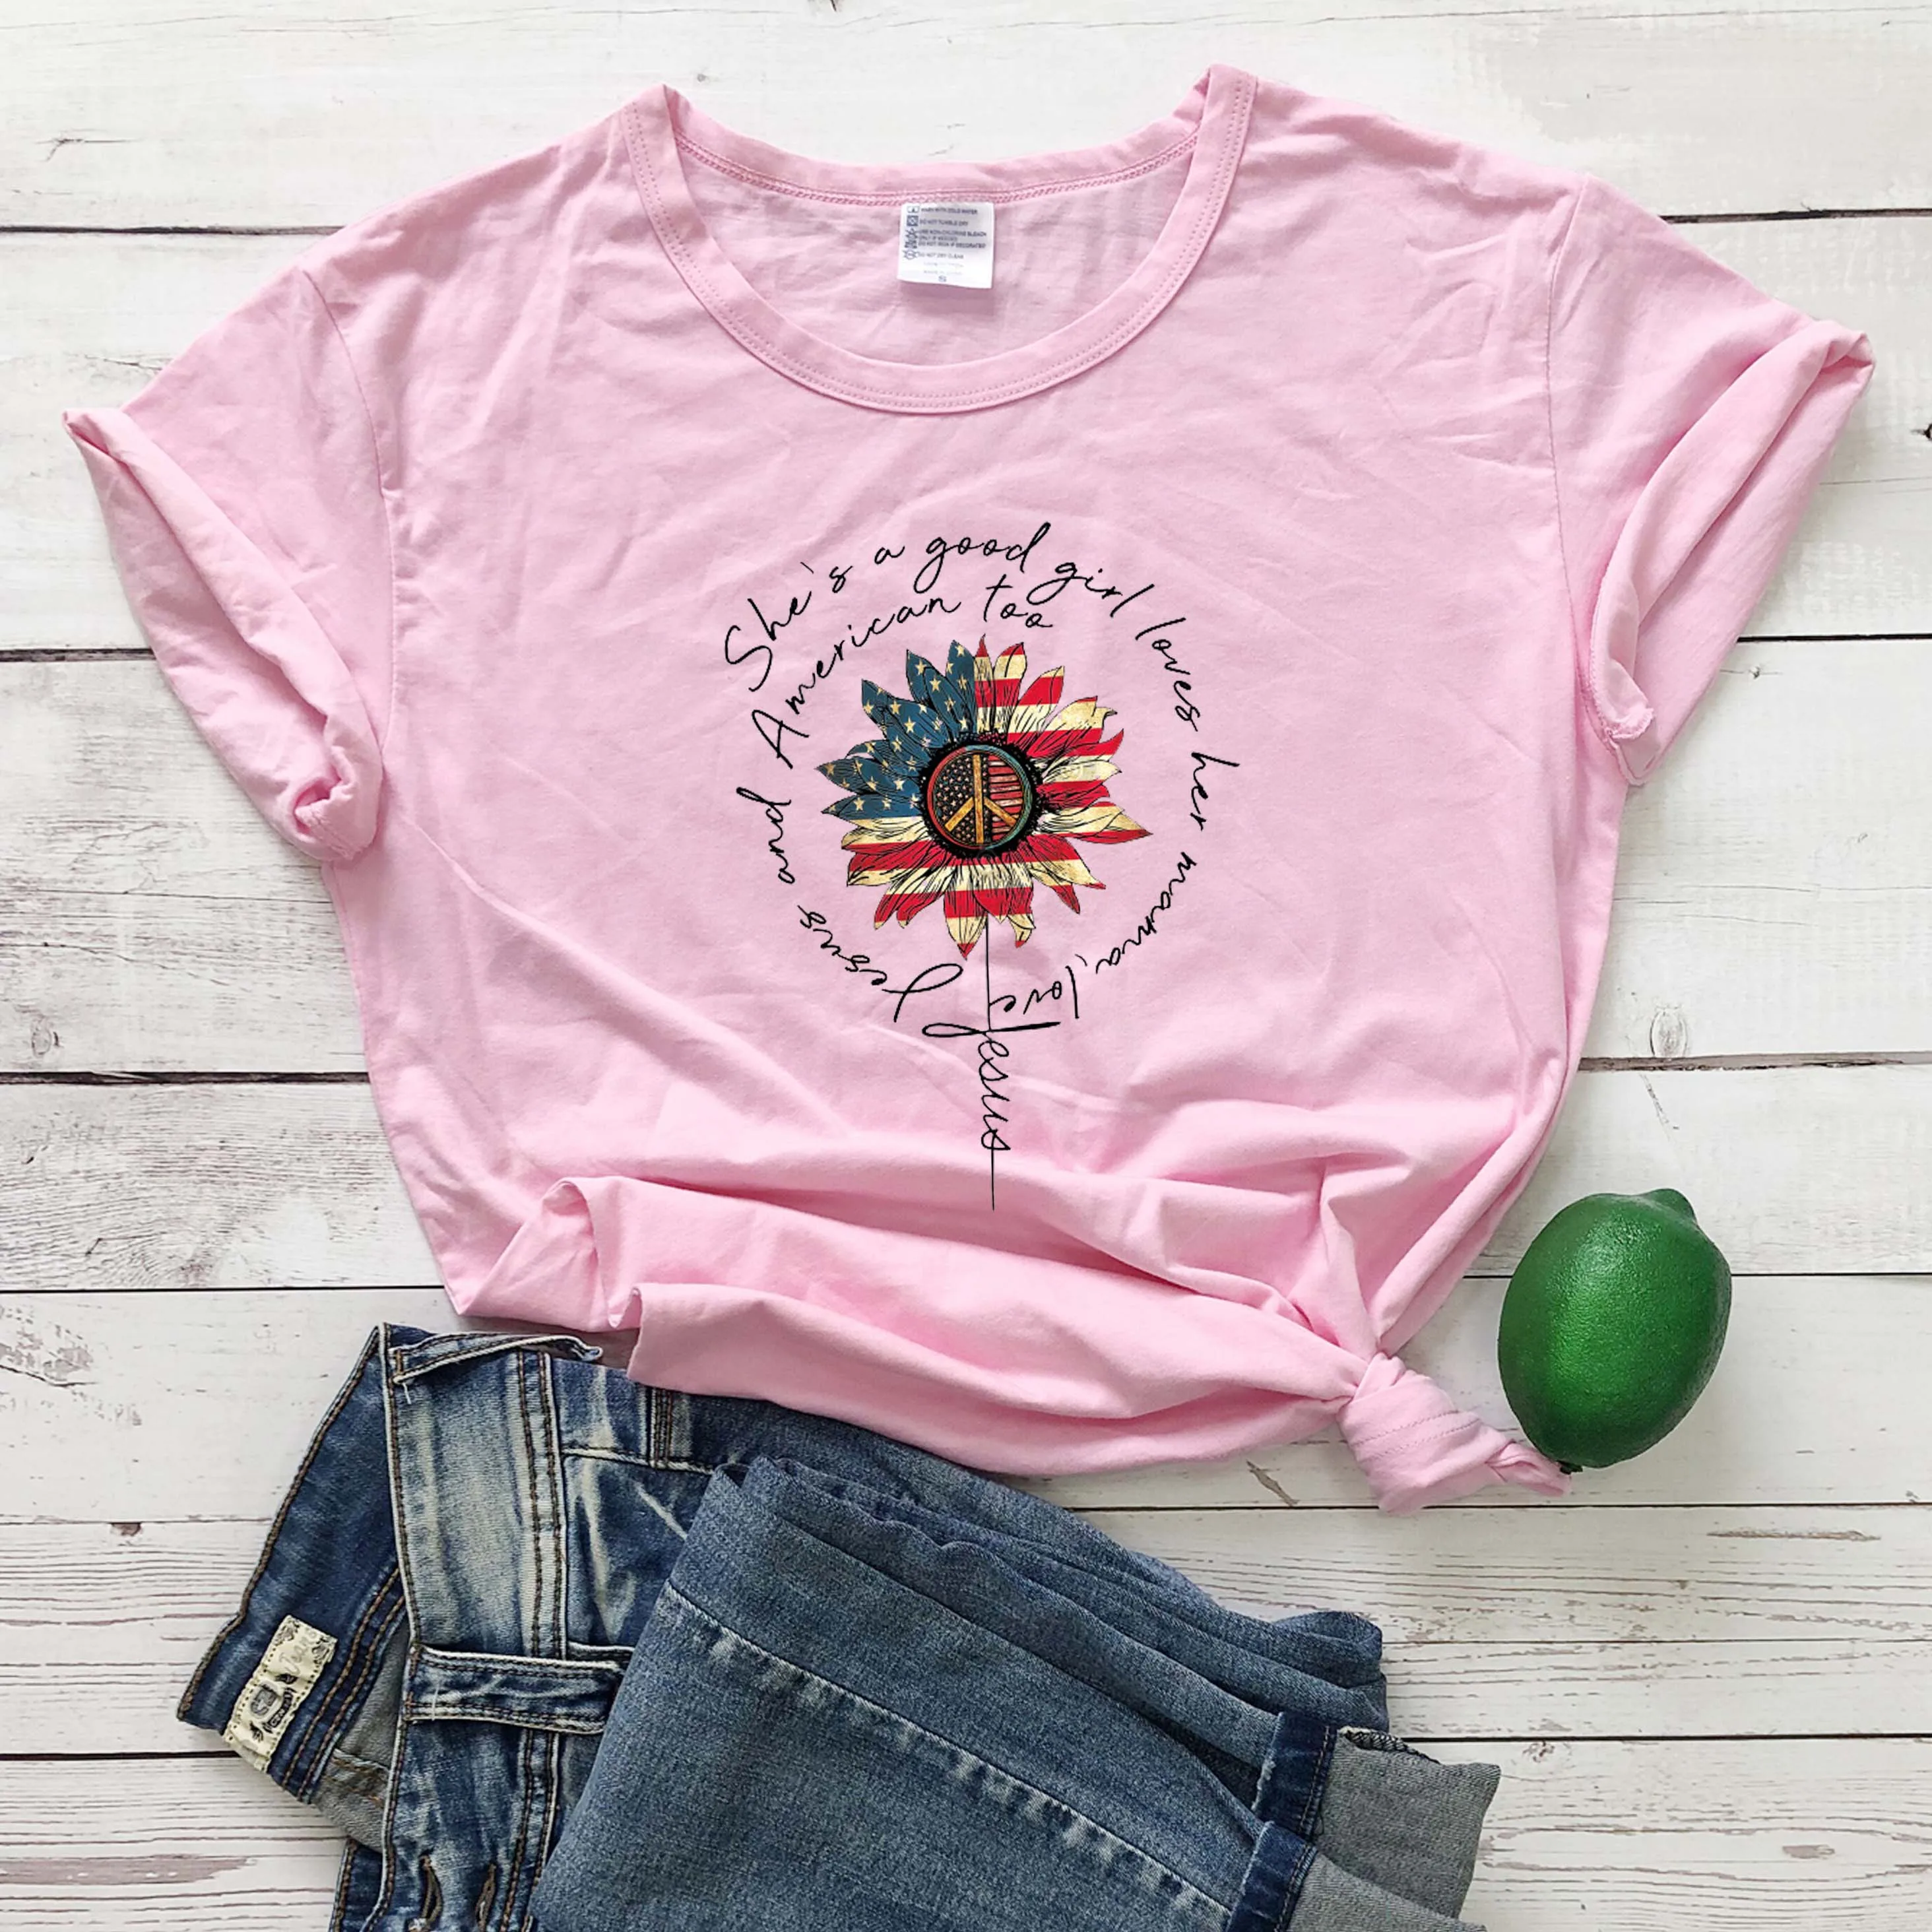 

Jesus she is a good gril pure cotton sunflowers women fashion unisex grunge tumblr hipster t shirt girl gift vintage tees tops